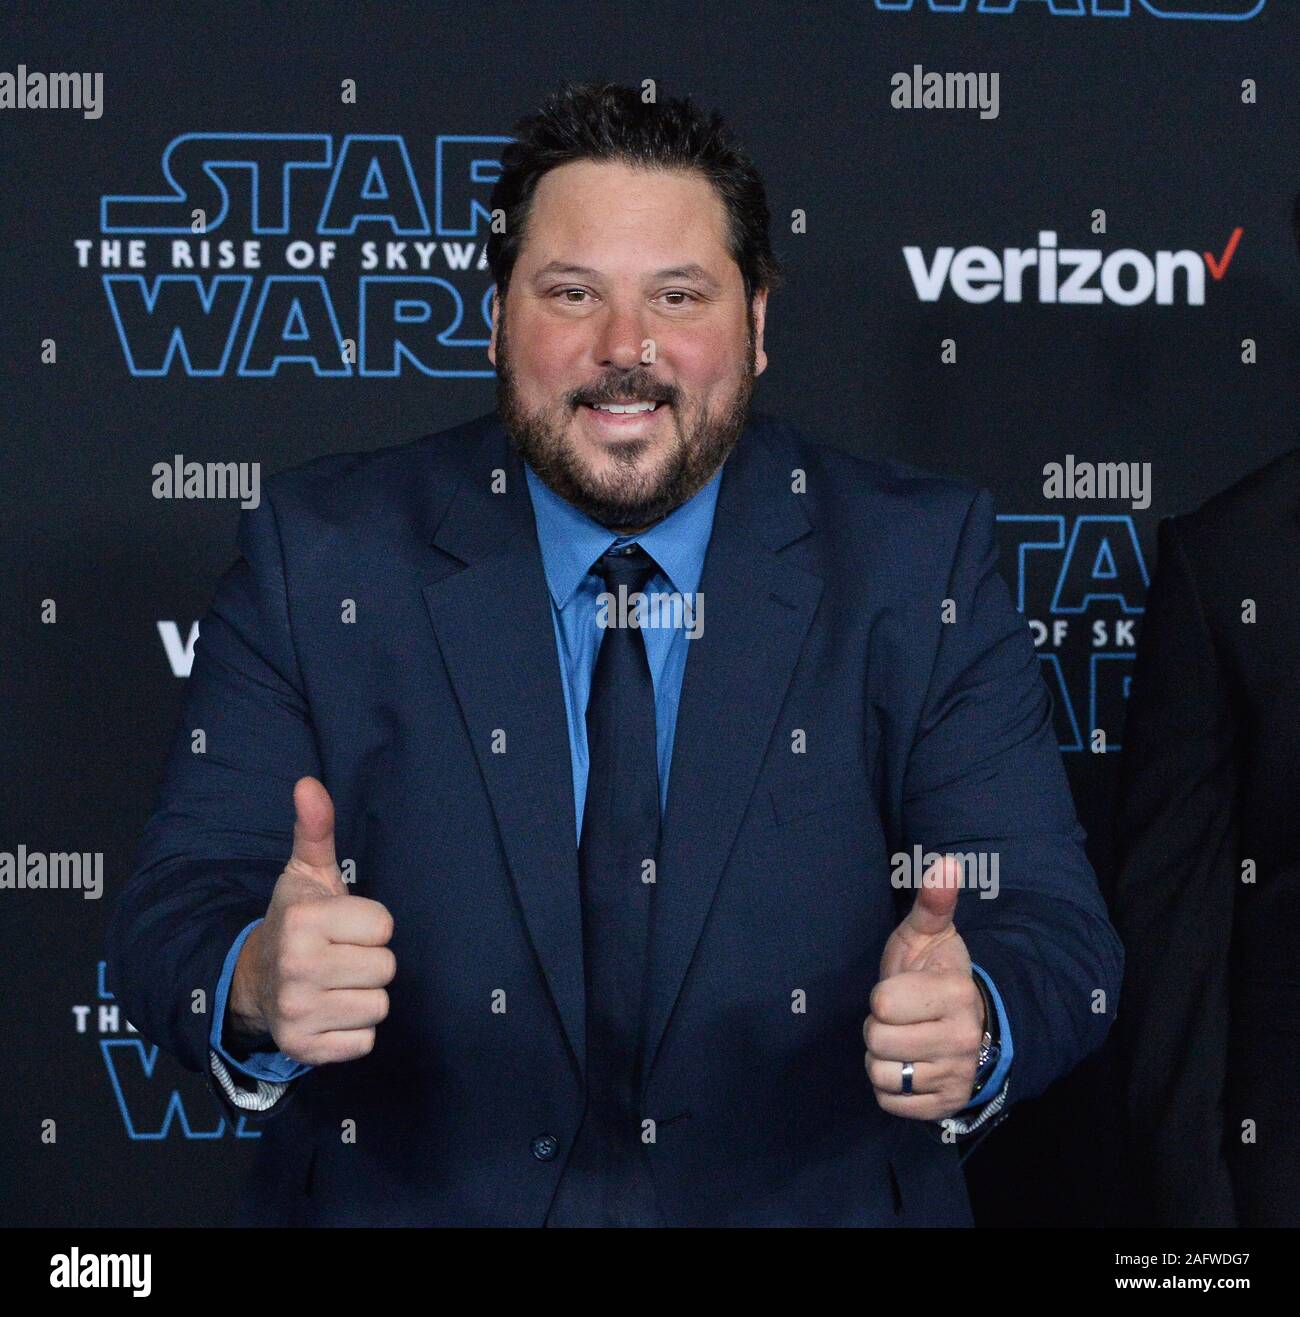 Los Angeles, United States. 17th Dec, 2019. Cast member Greg Grunberg attends the premiere the motion picture sci-fi fantasy 'Star Wars: The Rise of Skywalker' at the TCL Chinese Theatre in the Hollywood section of Los Angeles on Monday, December 16, 2019. Storyline: The surviving Resistance faces the First Order once more in the final chapter of the Skywalker saga. Photo by Jim Ruymen/UPI Credit: UPI/Alamy Live News Stock Photo